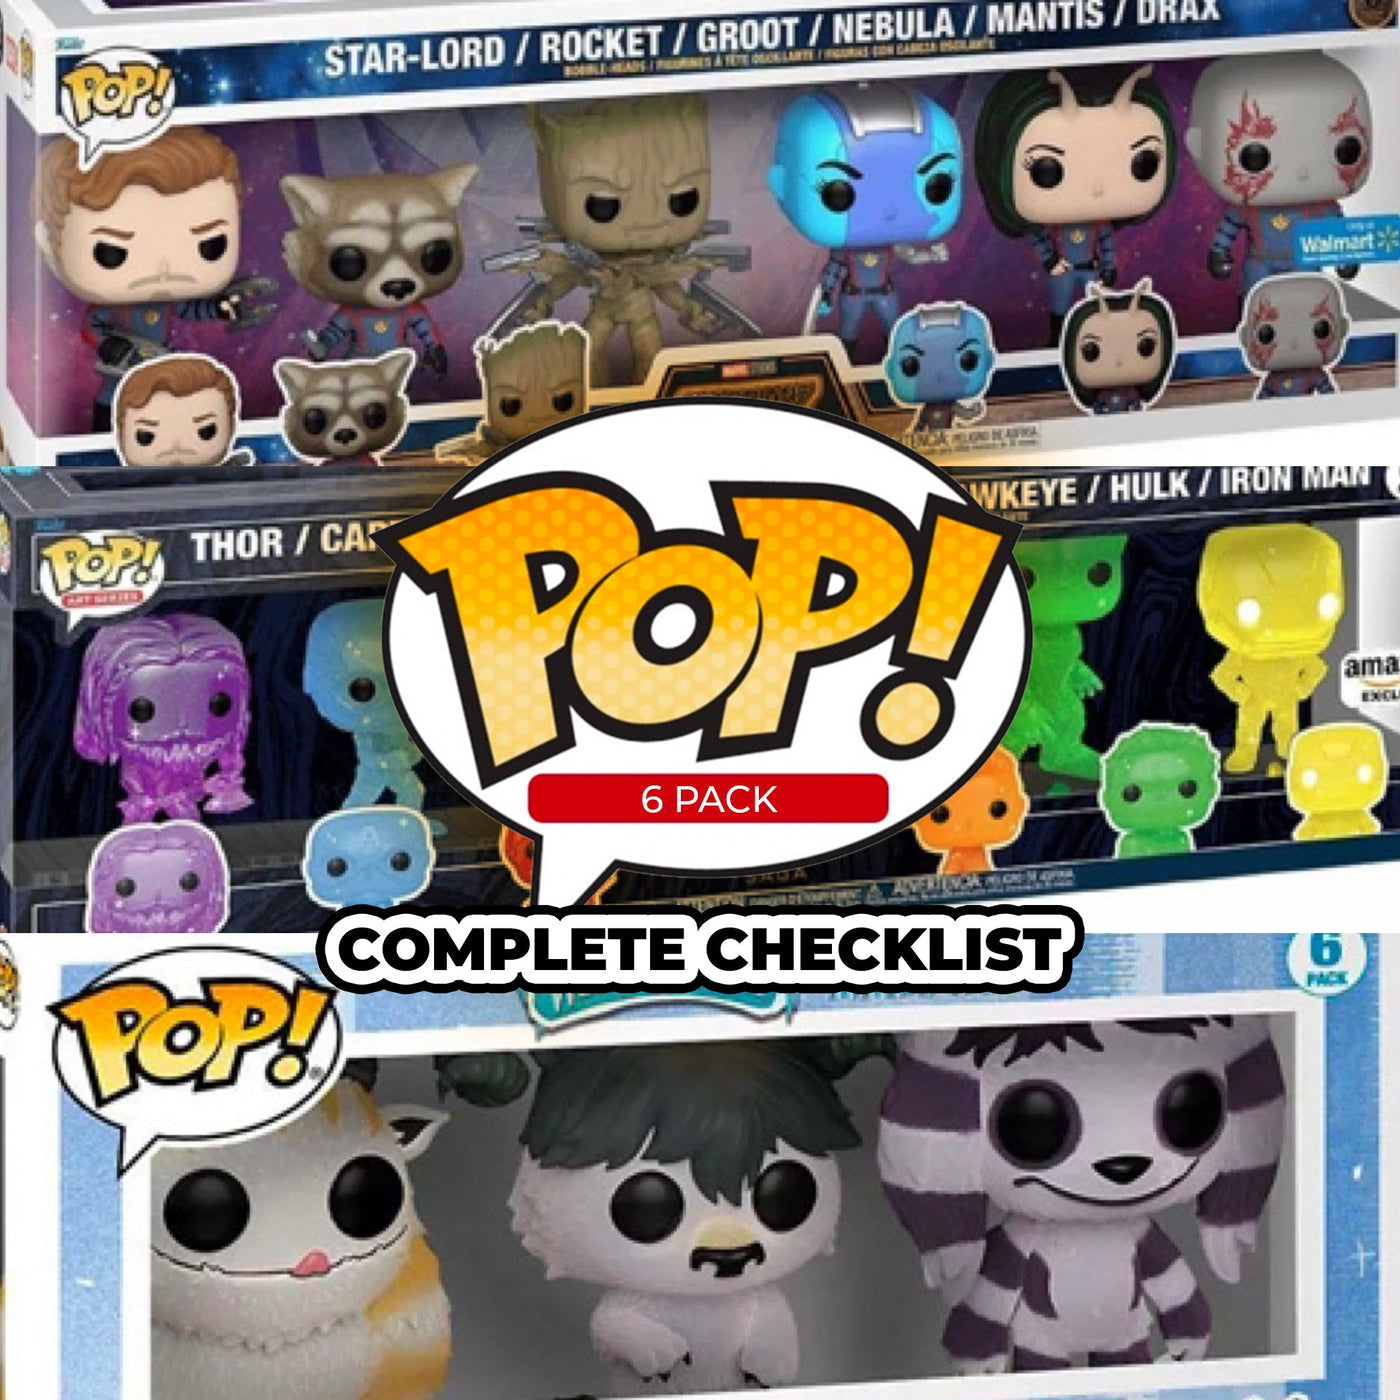 Funko Pop 6 Pack Complete Checklist and Protectors by Display Geek